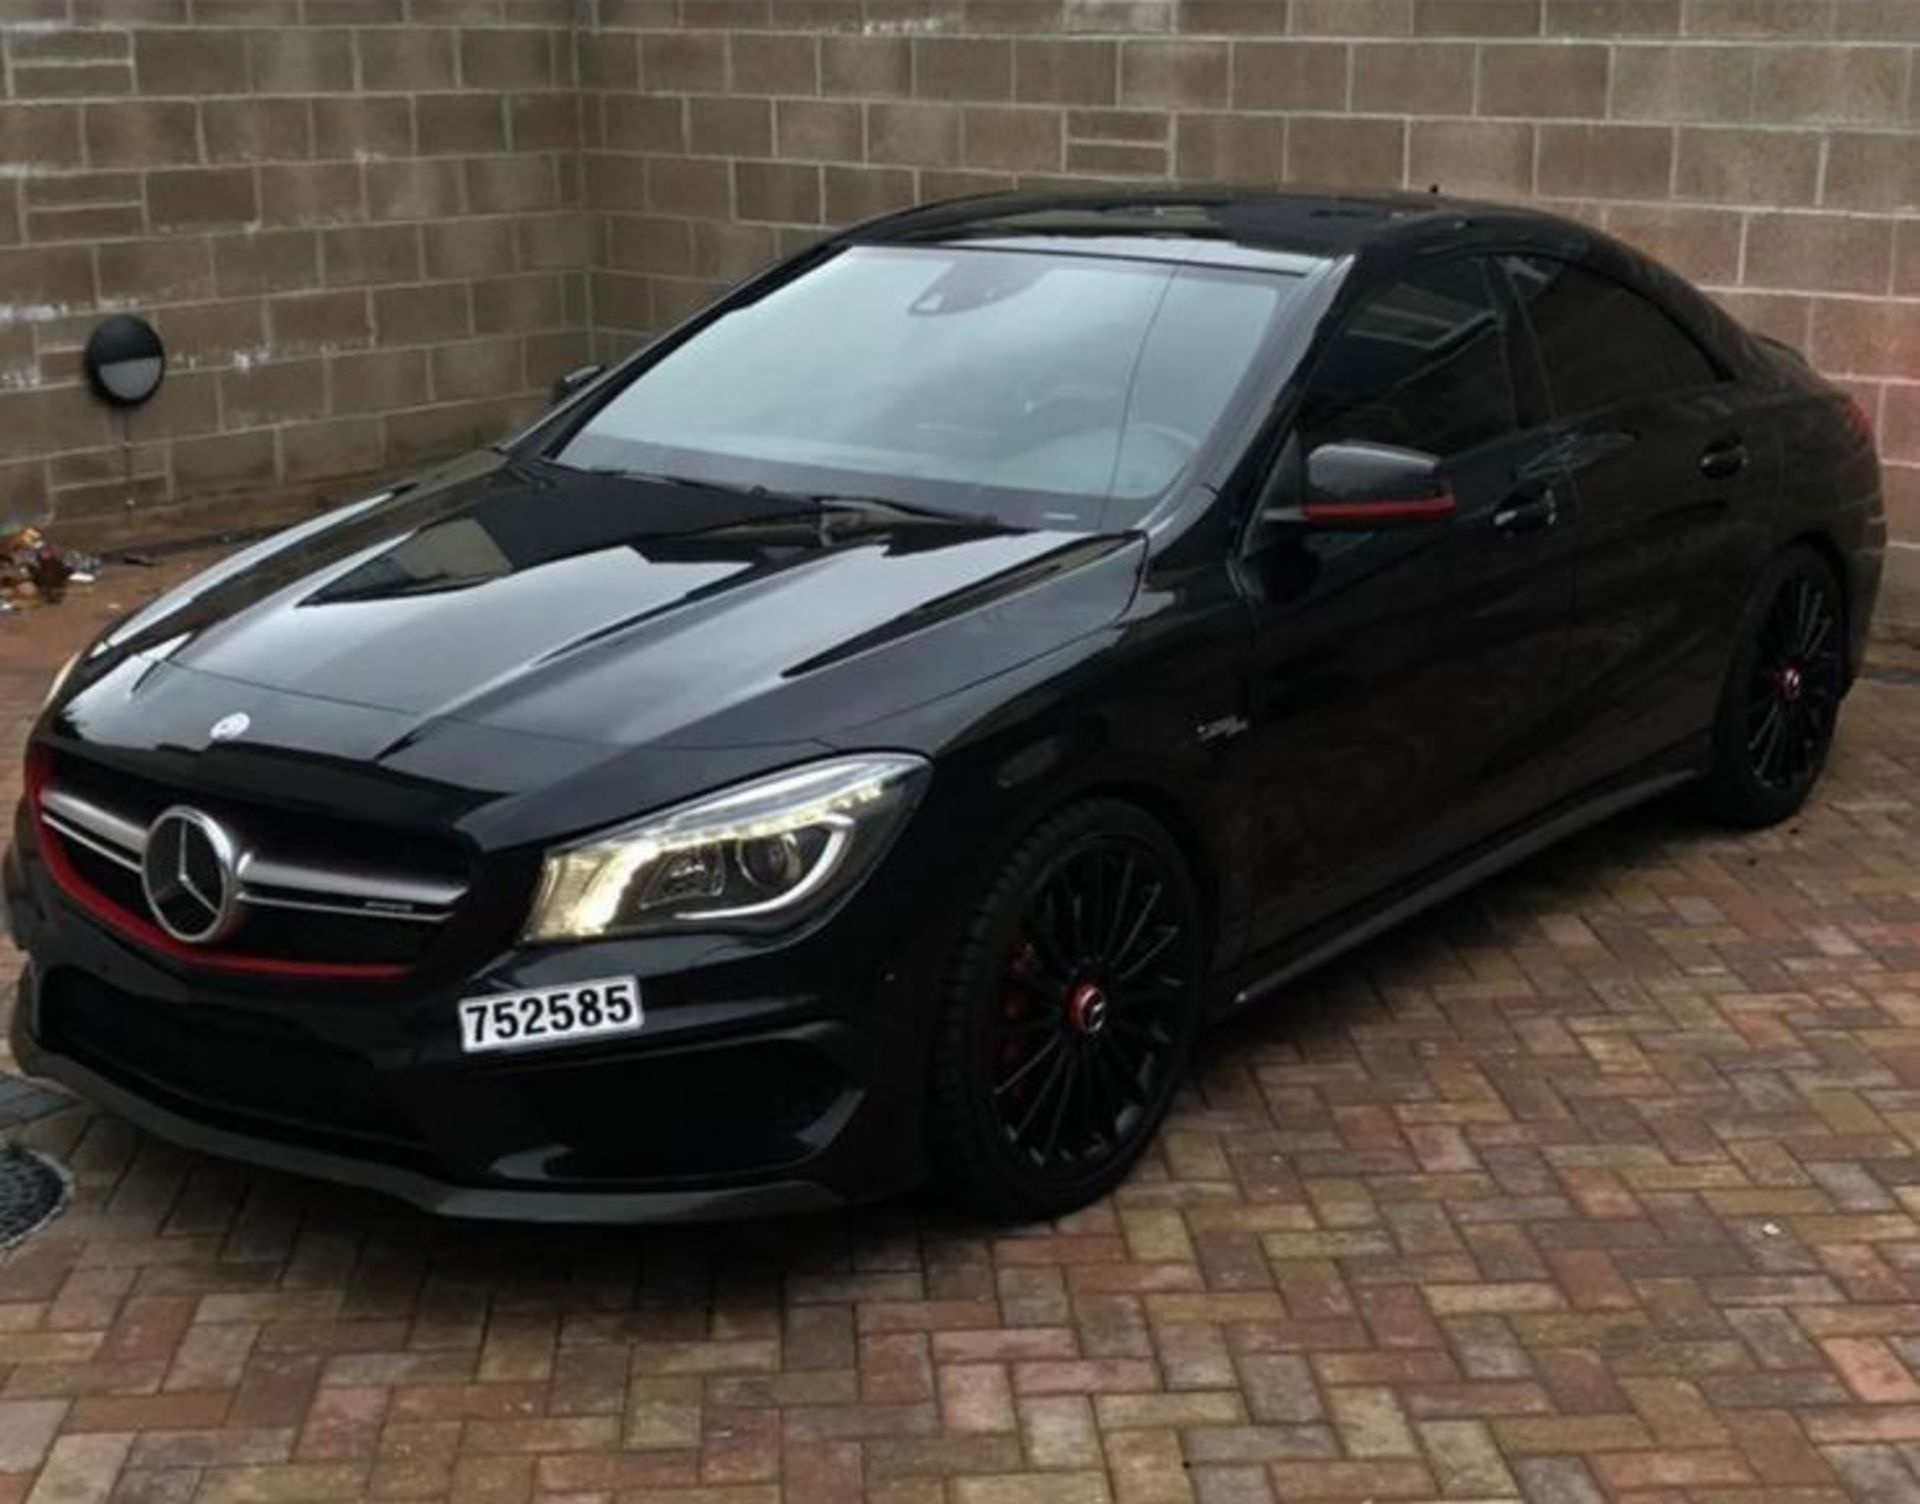 RARE 2015 MERCEDES-BENZ CLA45 AMG 4 MATIC SPECIAL EDITION 1, 355 BHP, 40,000KM / 25,000 MILES - Image 3 of 15